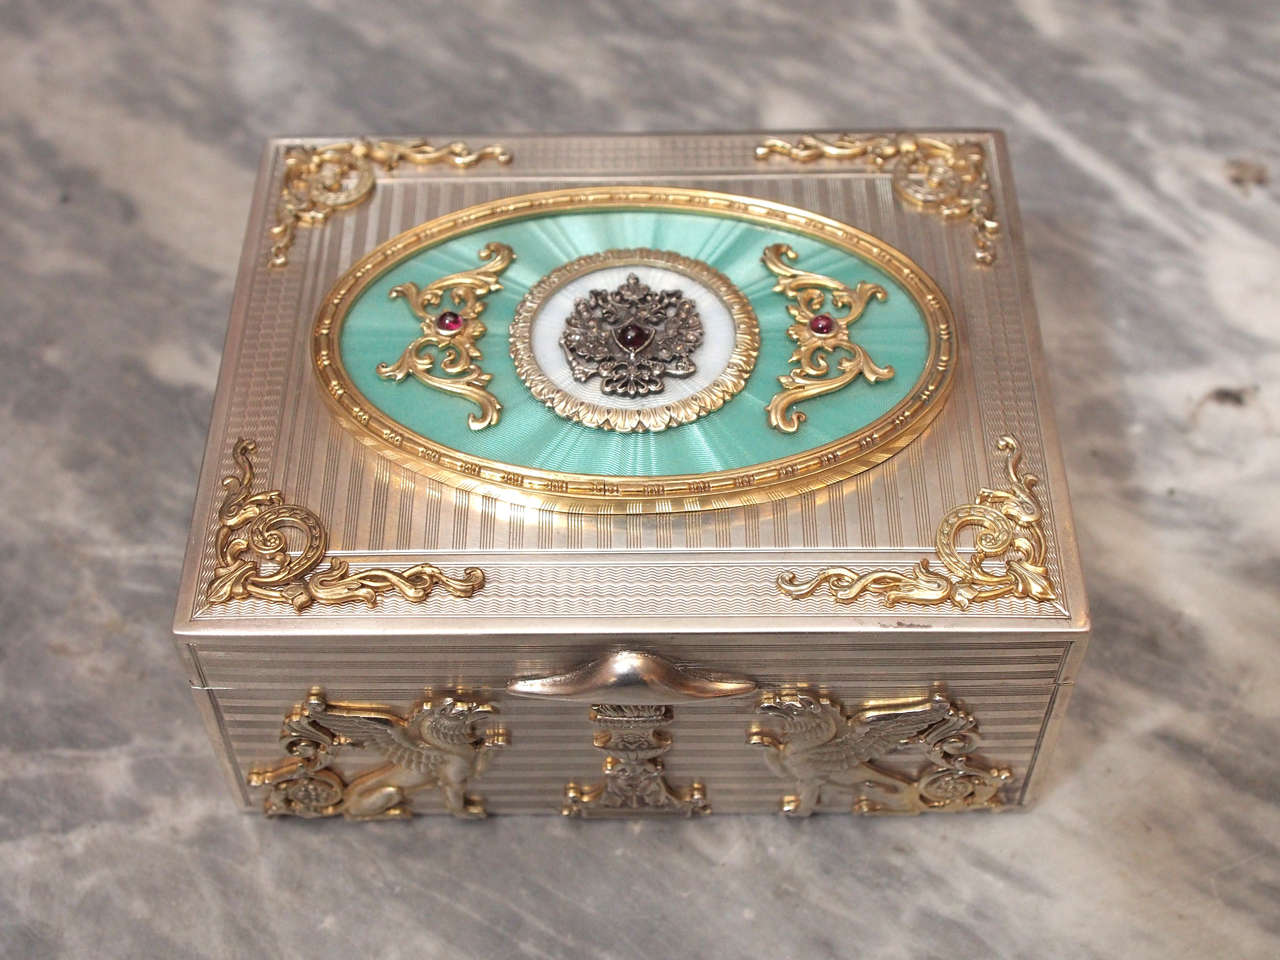 Russian silver box having gold wash appliqué and sphinx design throughout. Jeweled throughout with crown design to top over aqua blue guilloche enamel cartouche.